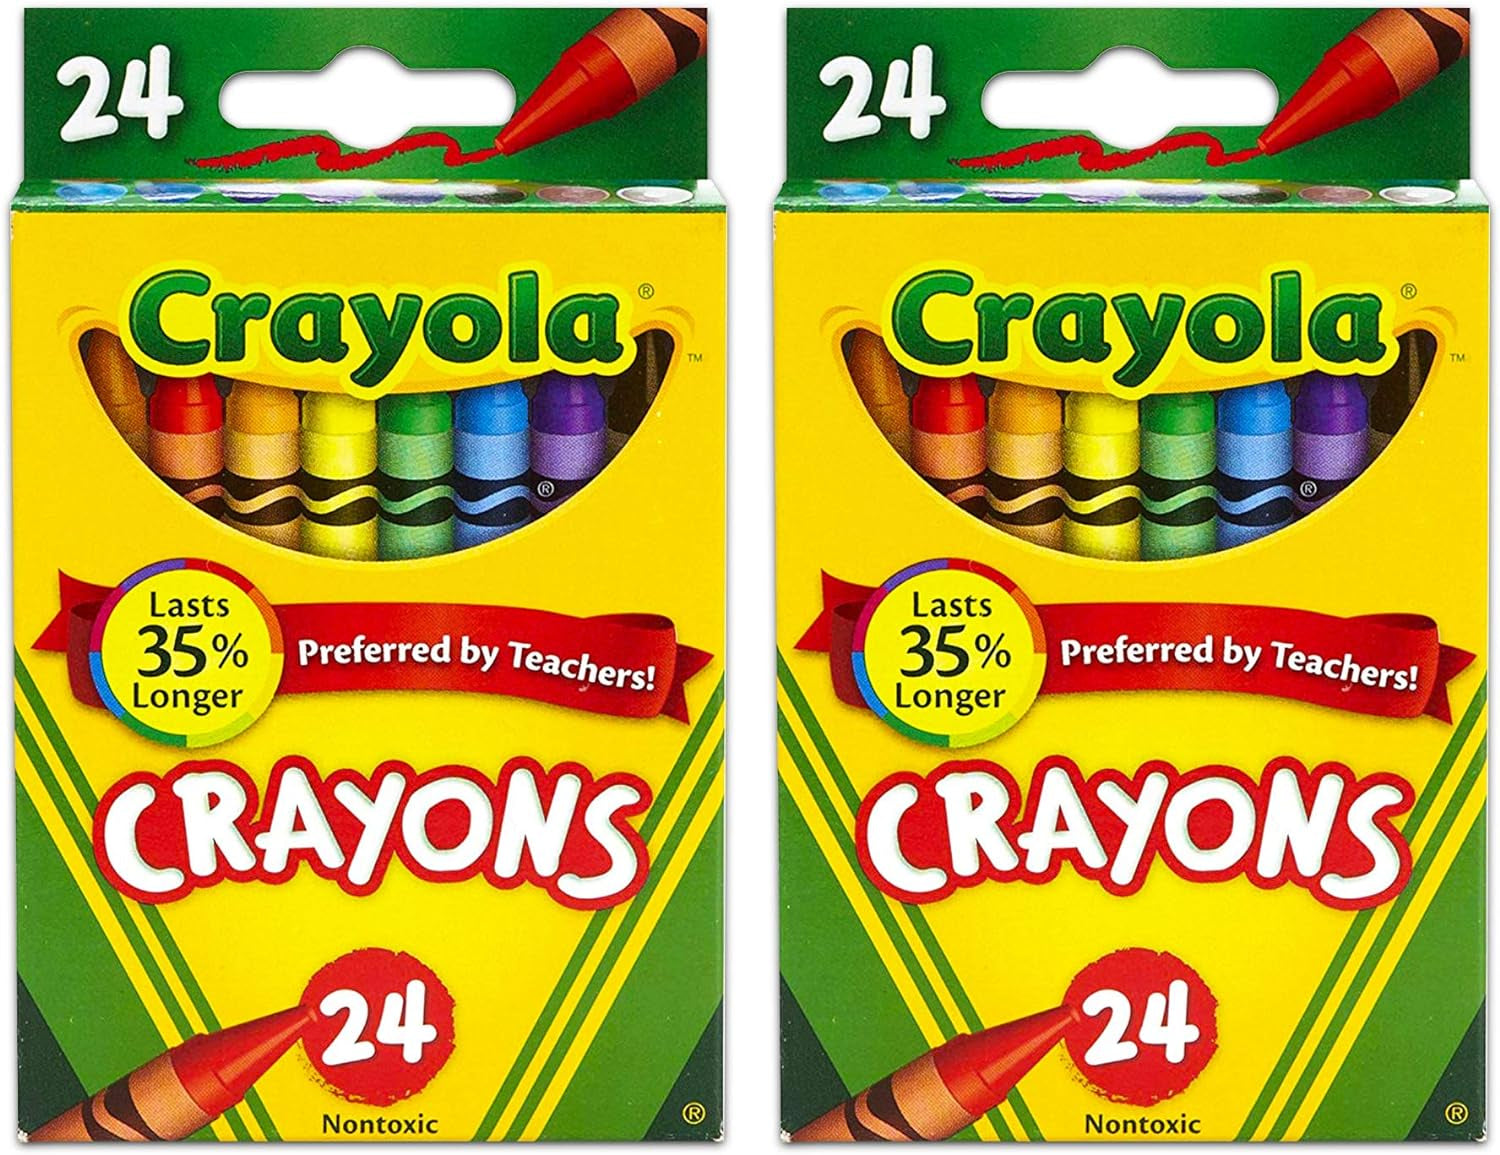 24 Count Box of Crayons Non-Toxic Color Coloring School Supplies (2 Packs)